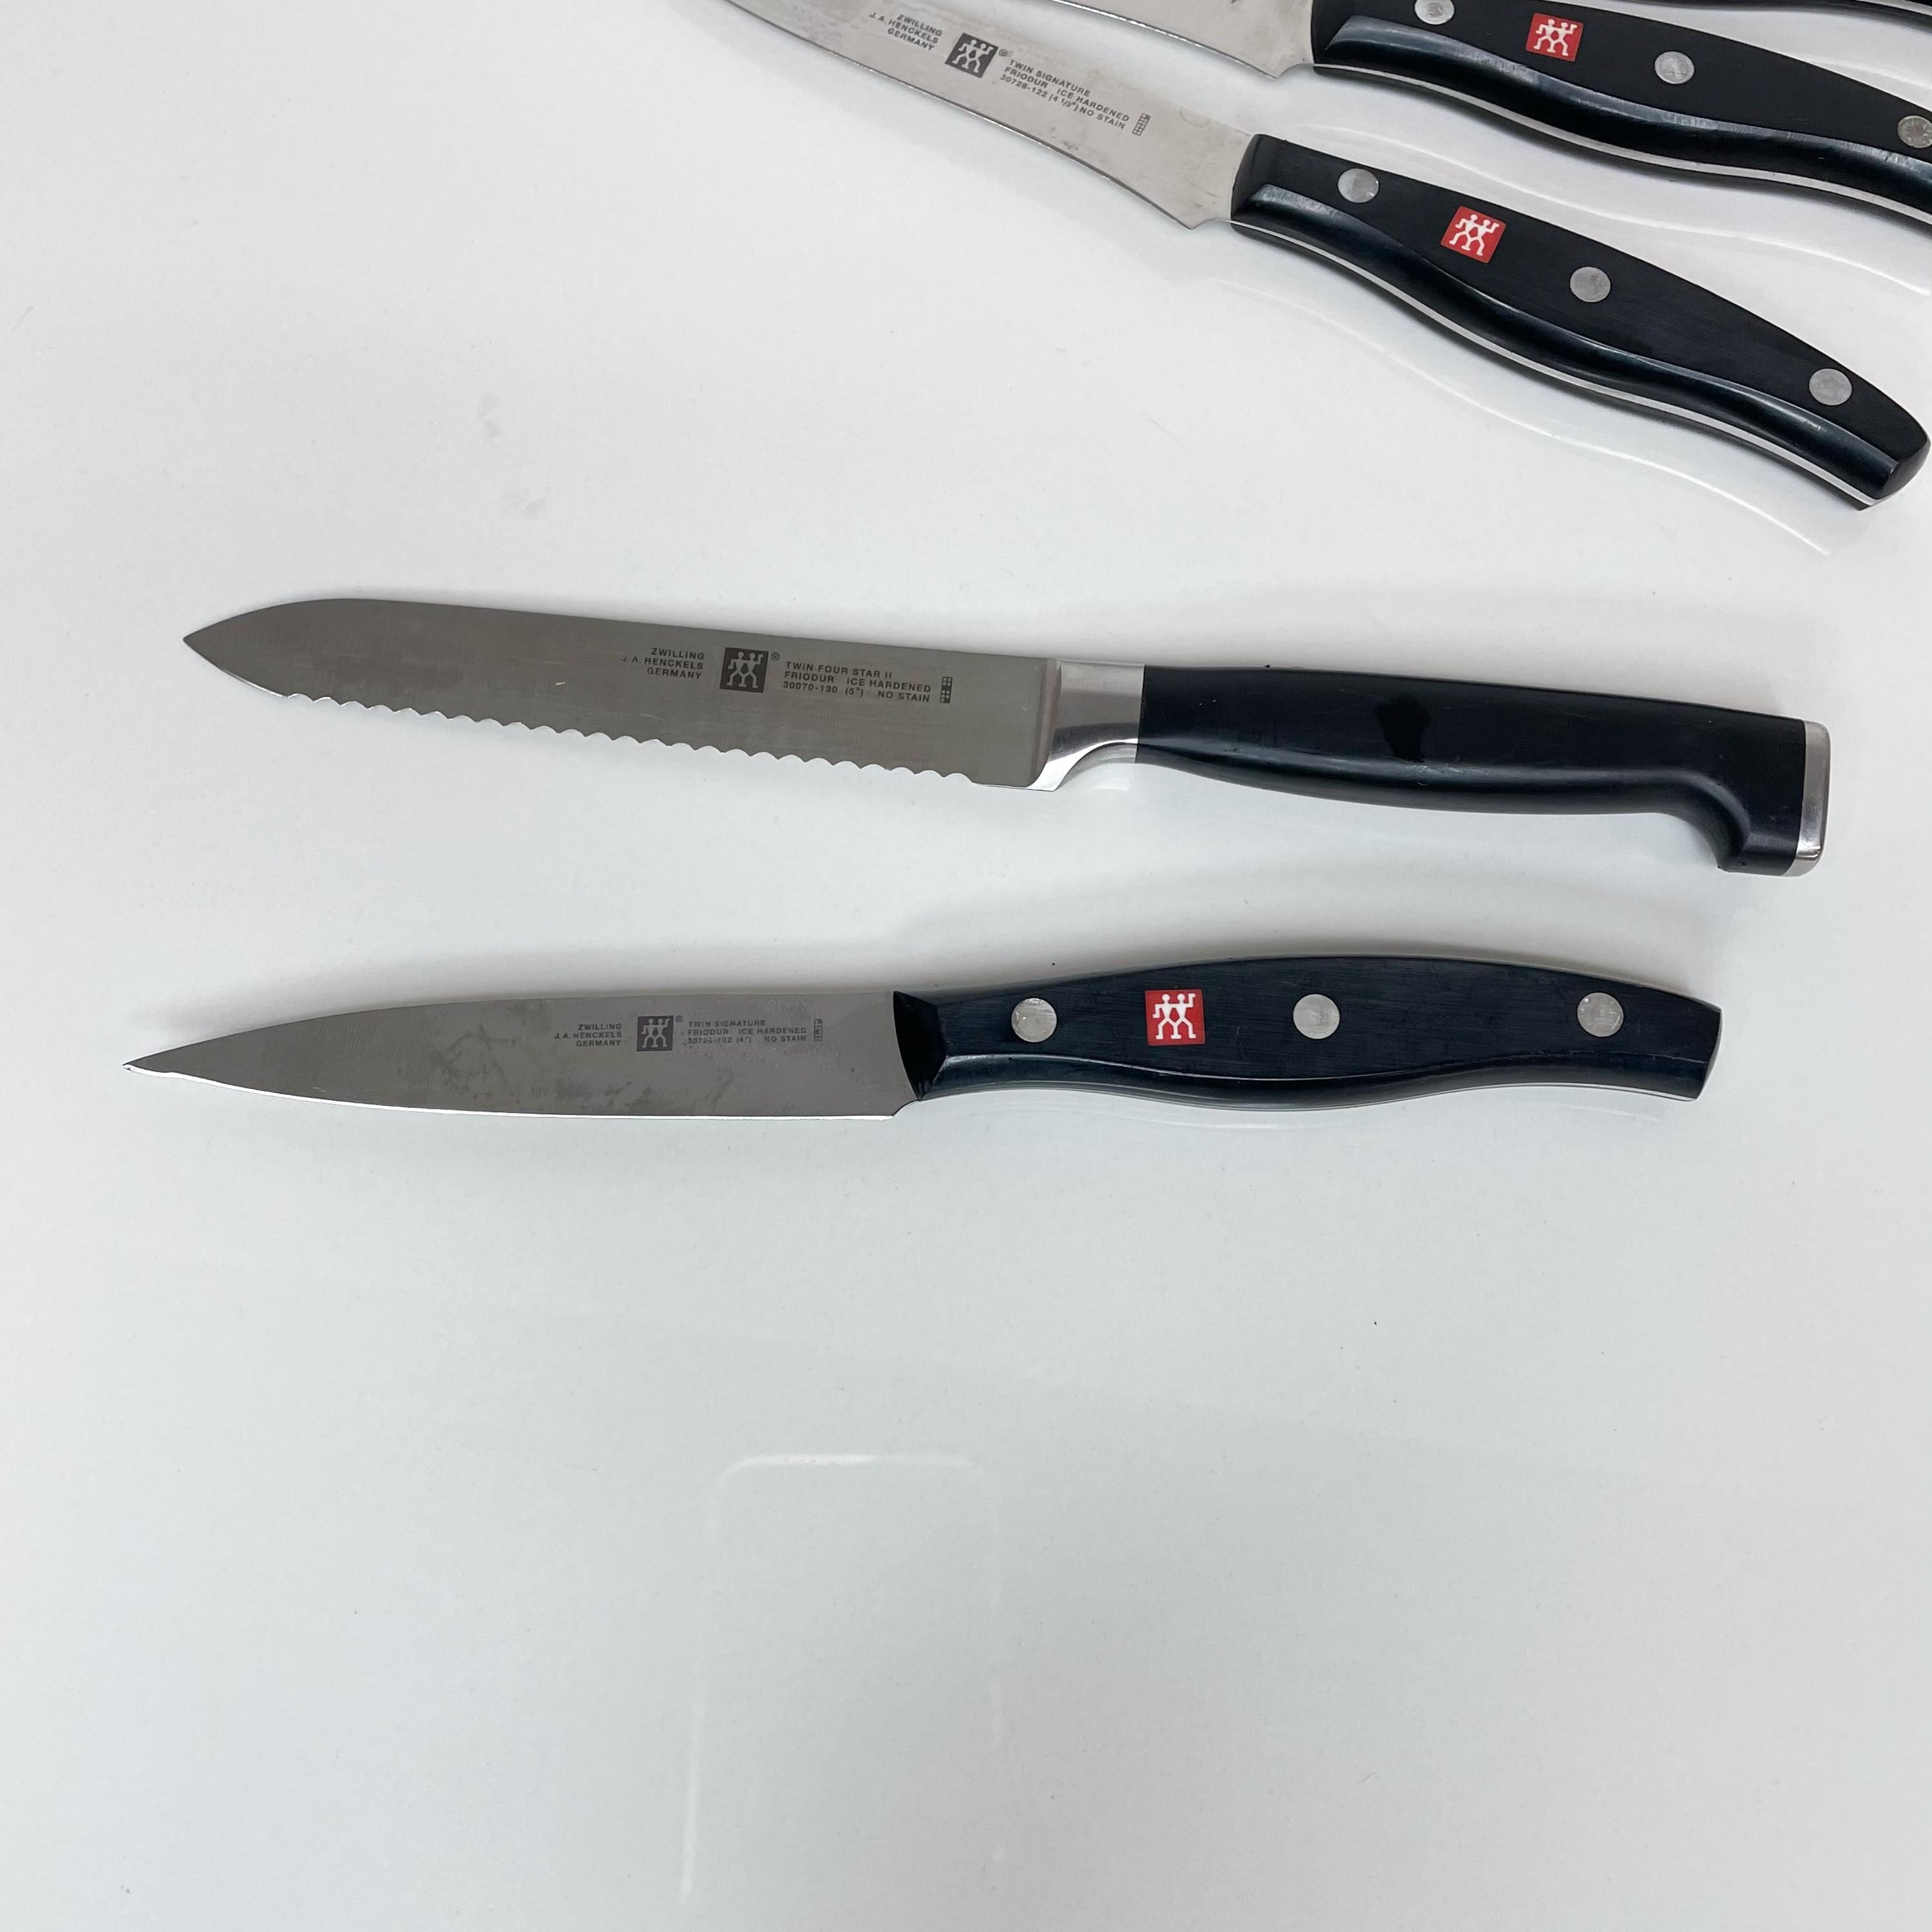 1970s Zwilling Set of 6 Black Knives by J A Henckels made in Germany  1